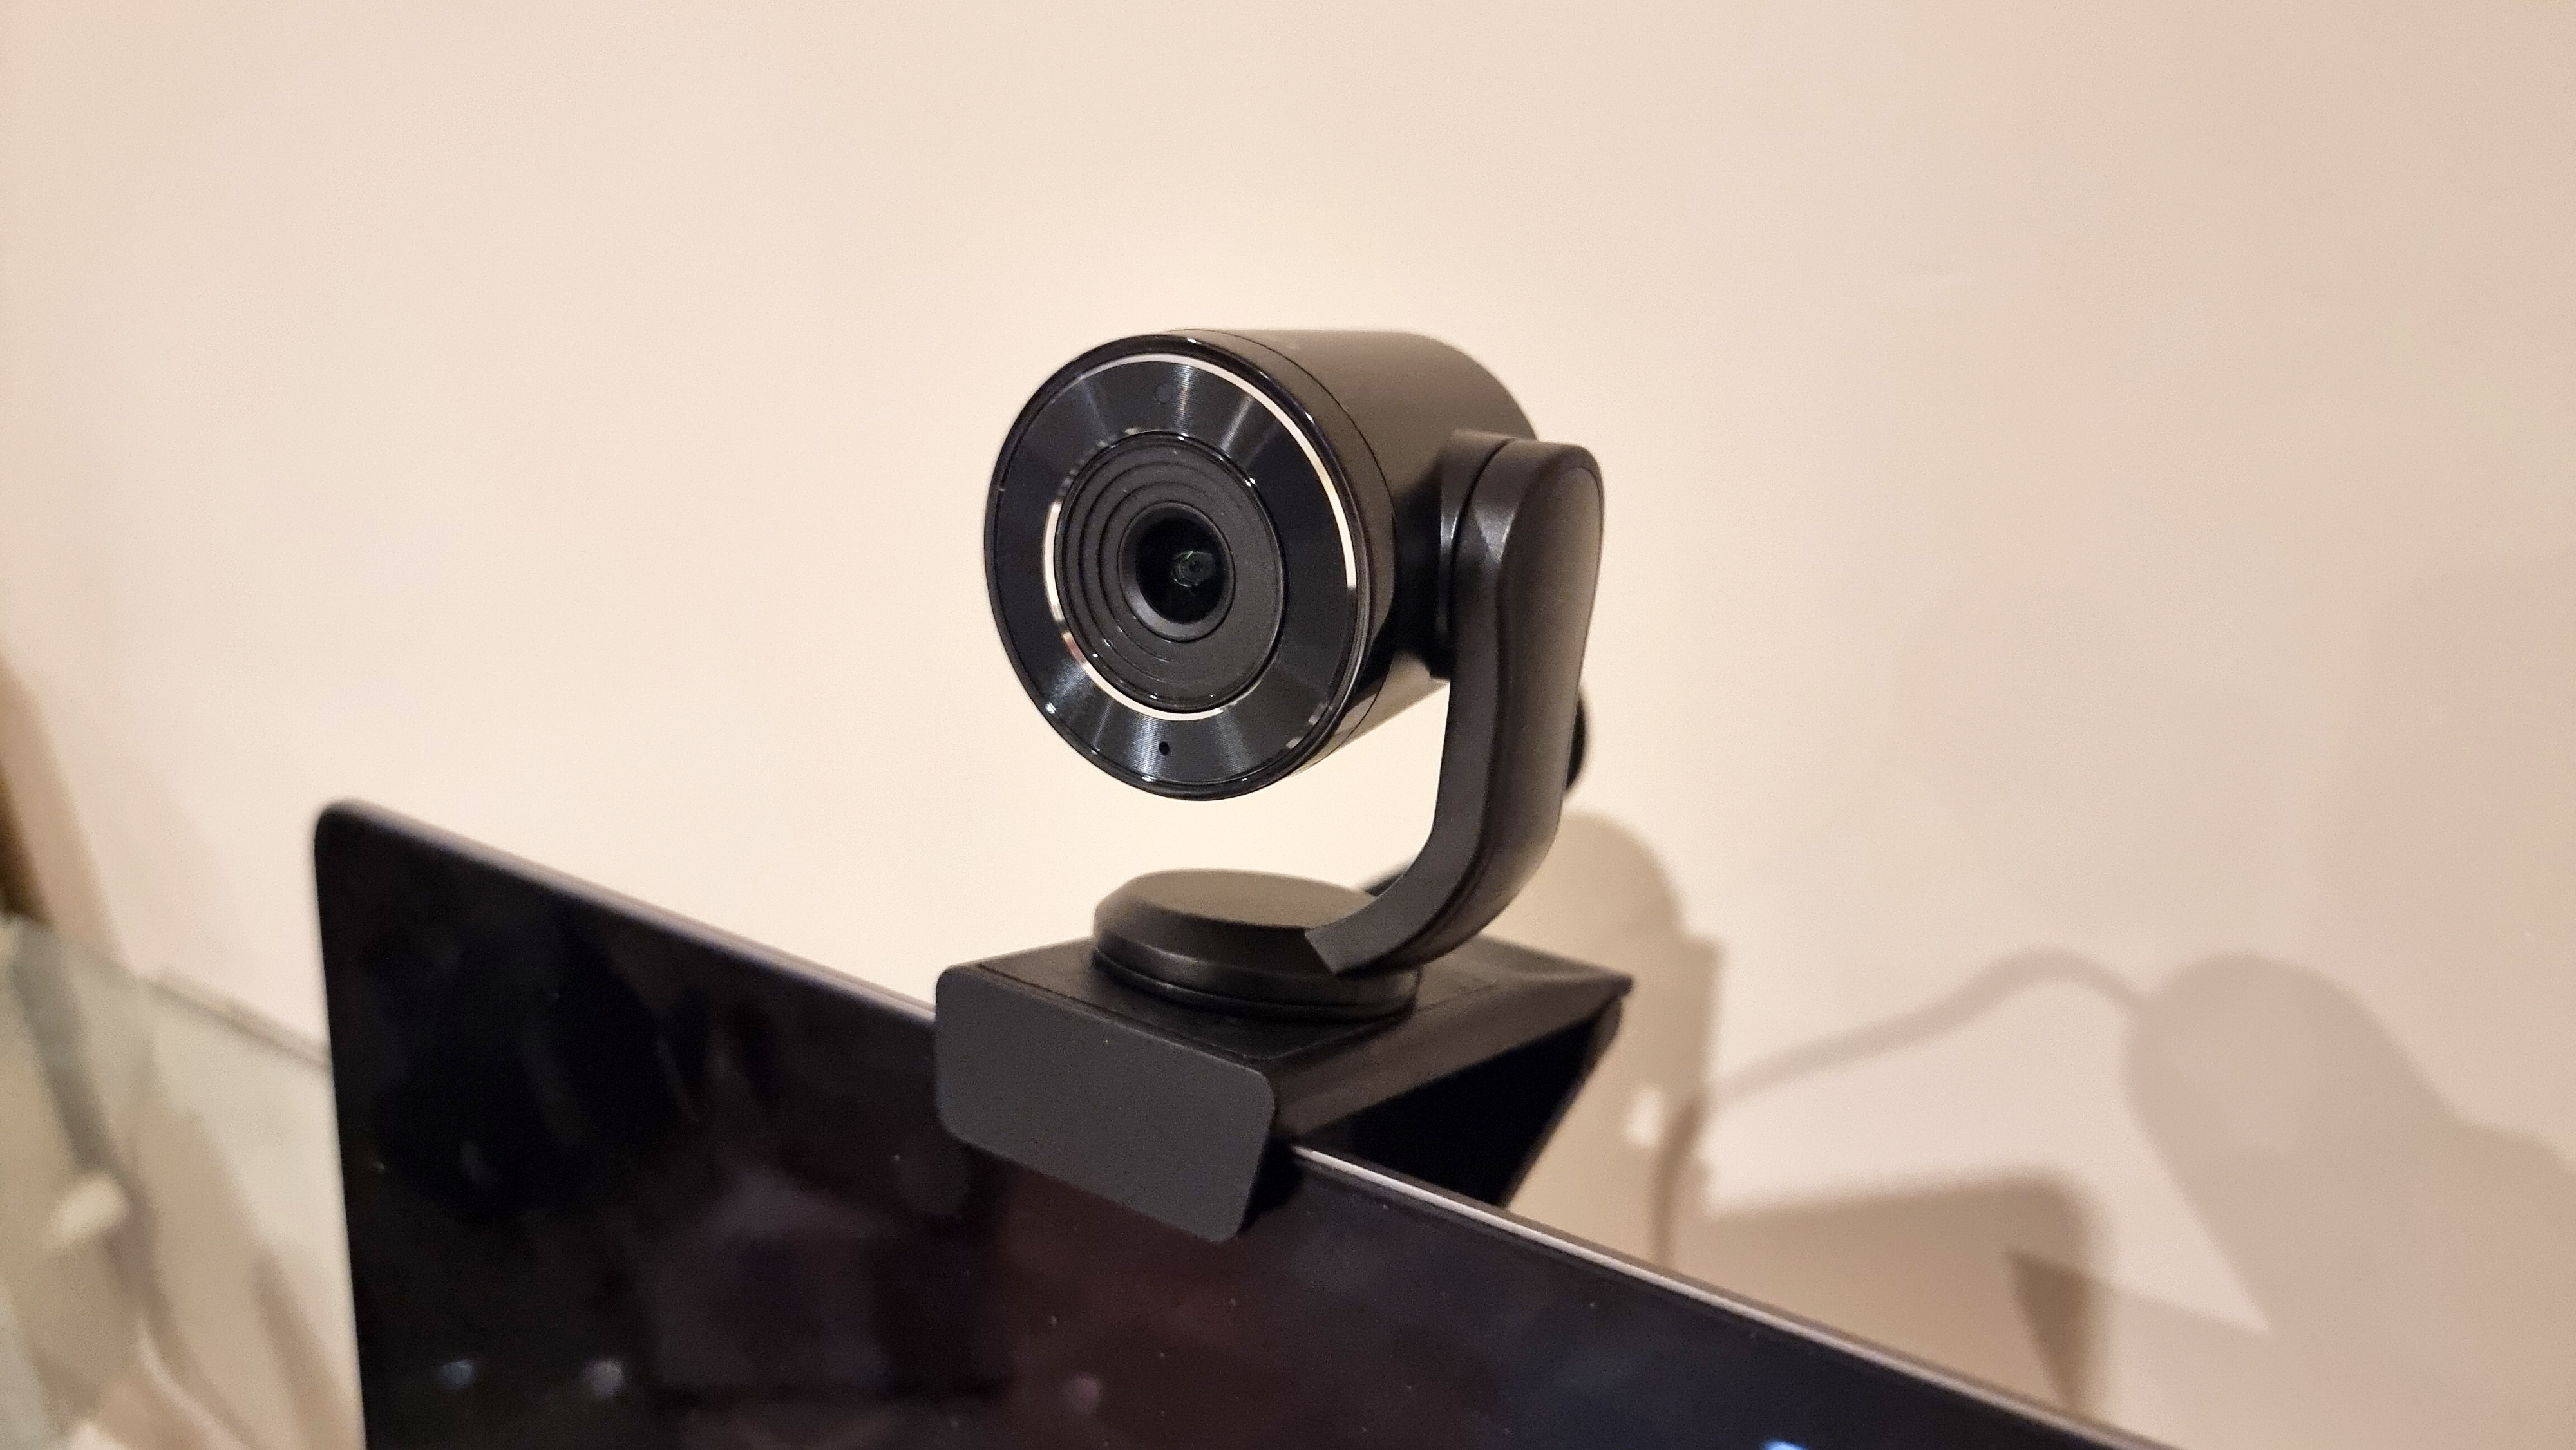 Toucan Pro Streaming Webcam review